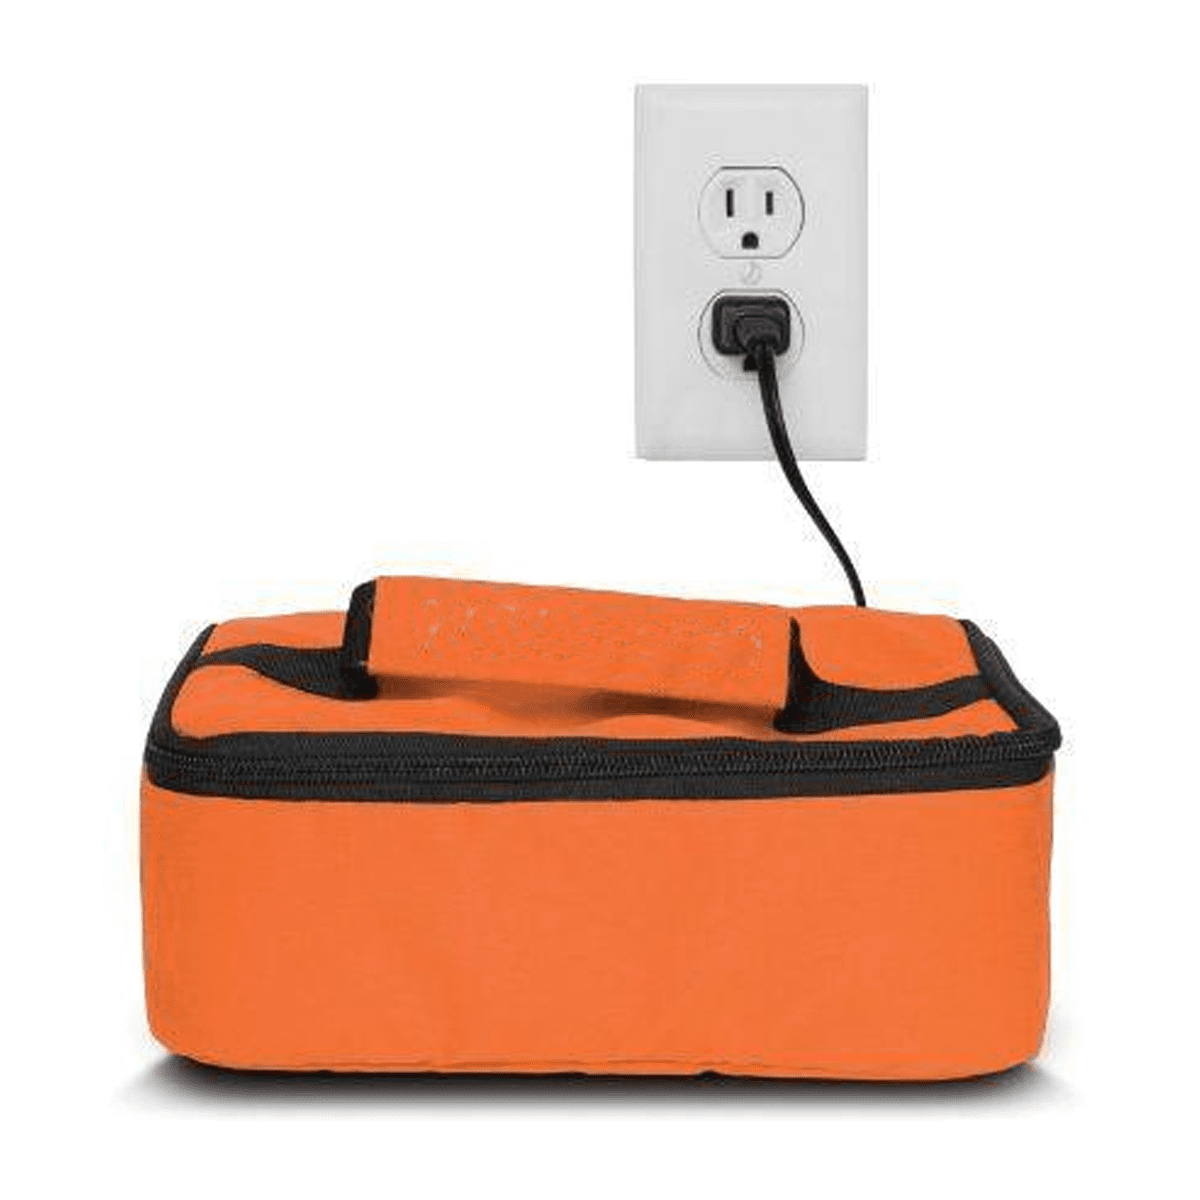 Personal Portable Oven from YIBOSS orange color